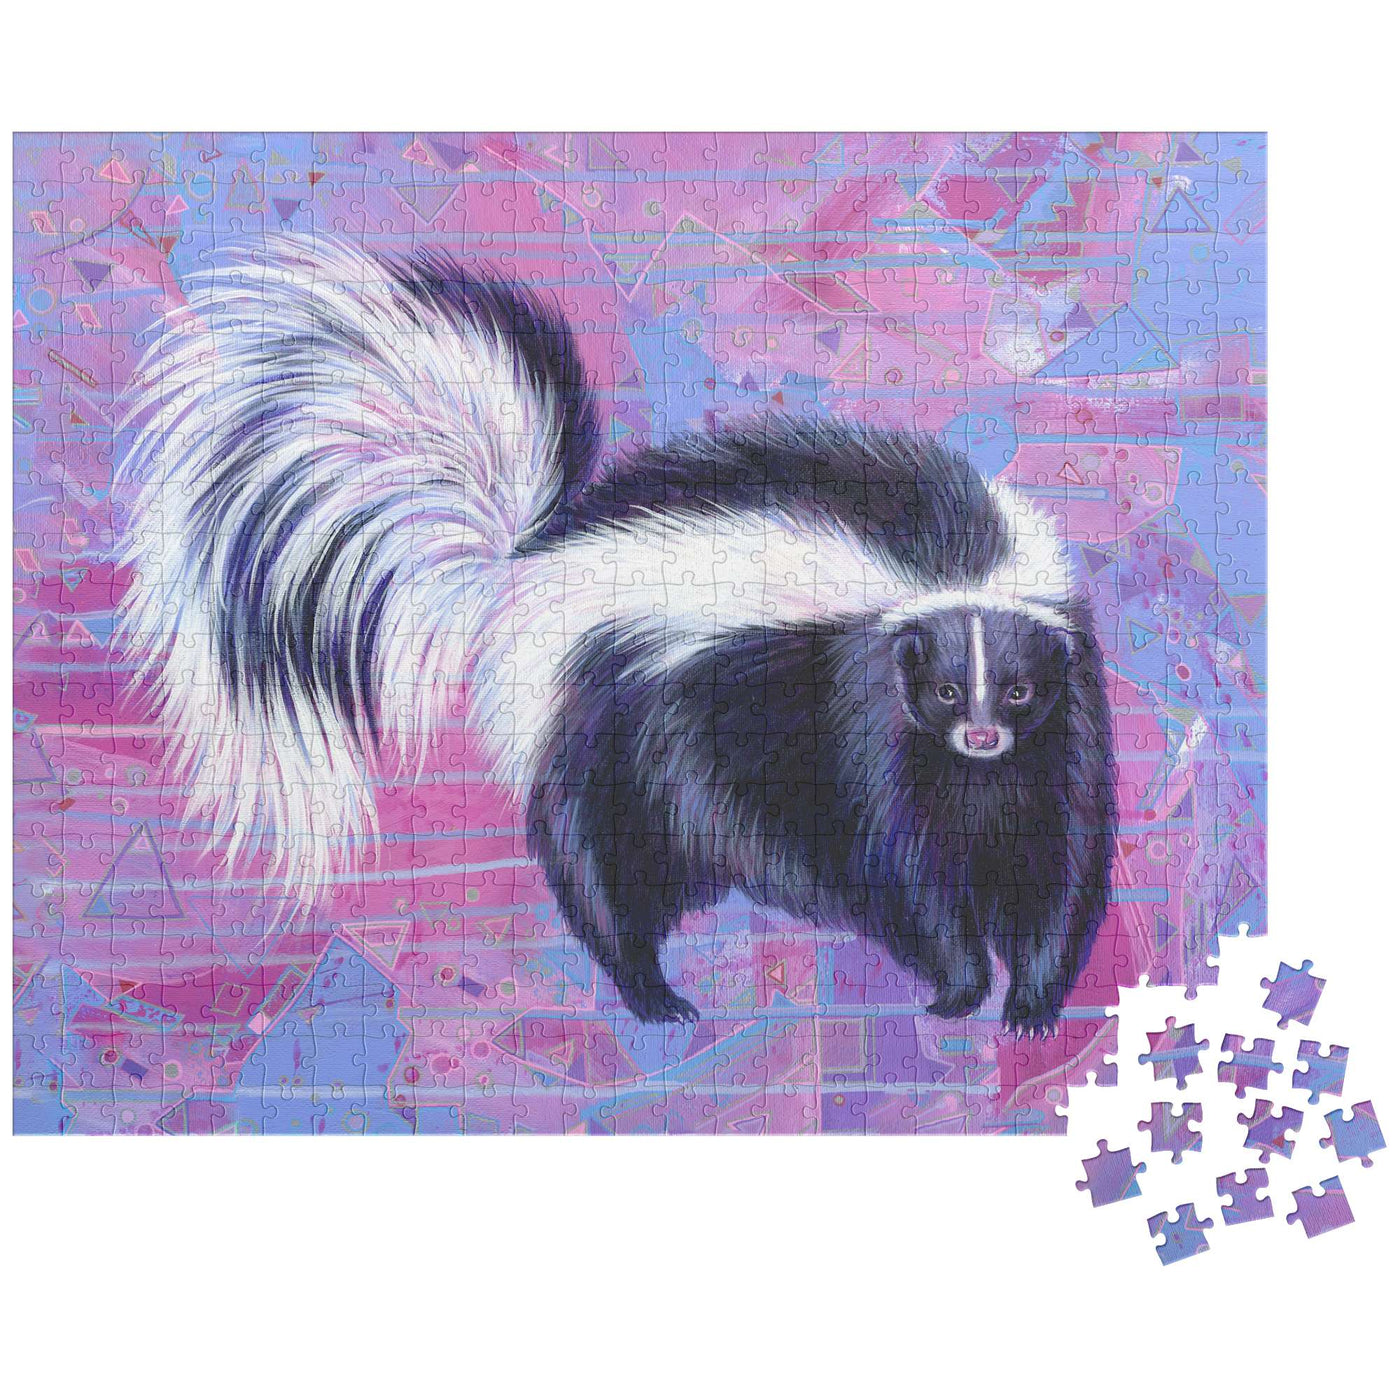 Skunk Puzzle featuring an illustration of a skunk, mostly assembled on a white background with a few pieces scattered beside it.